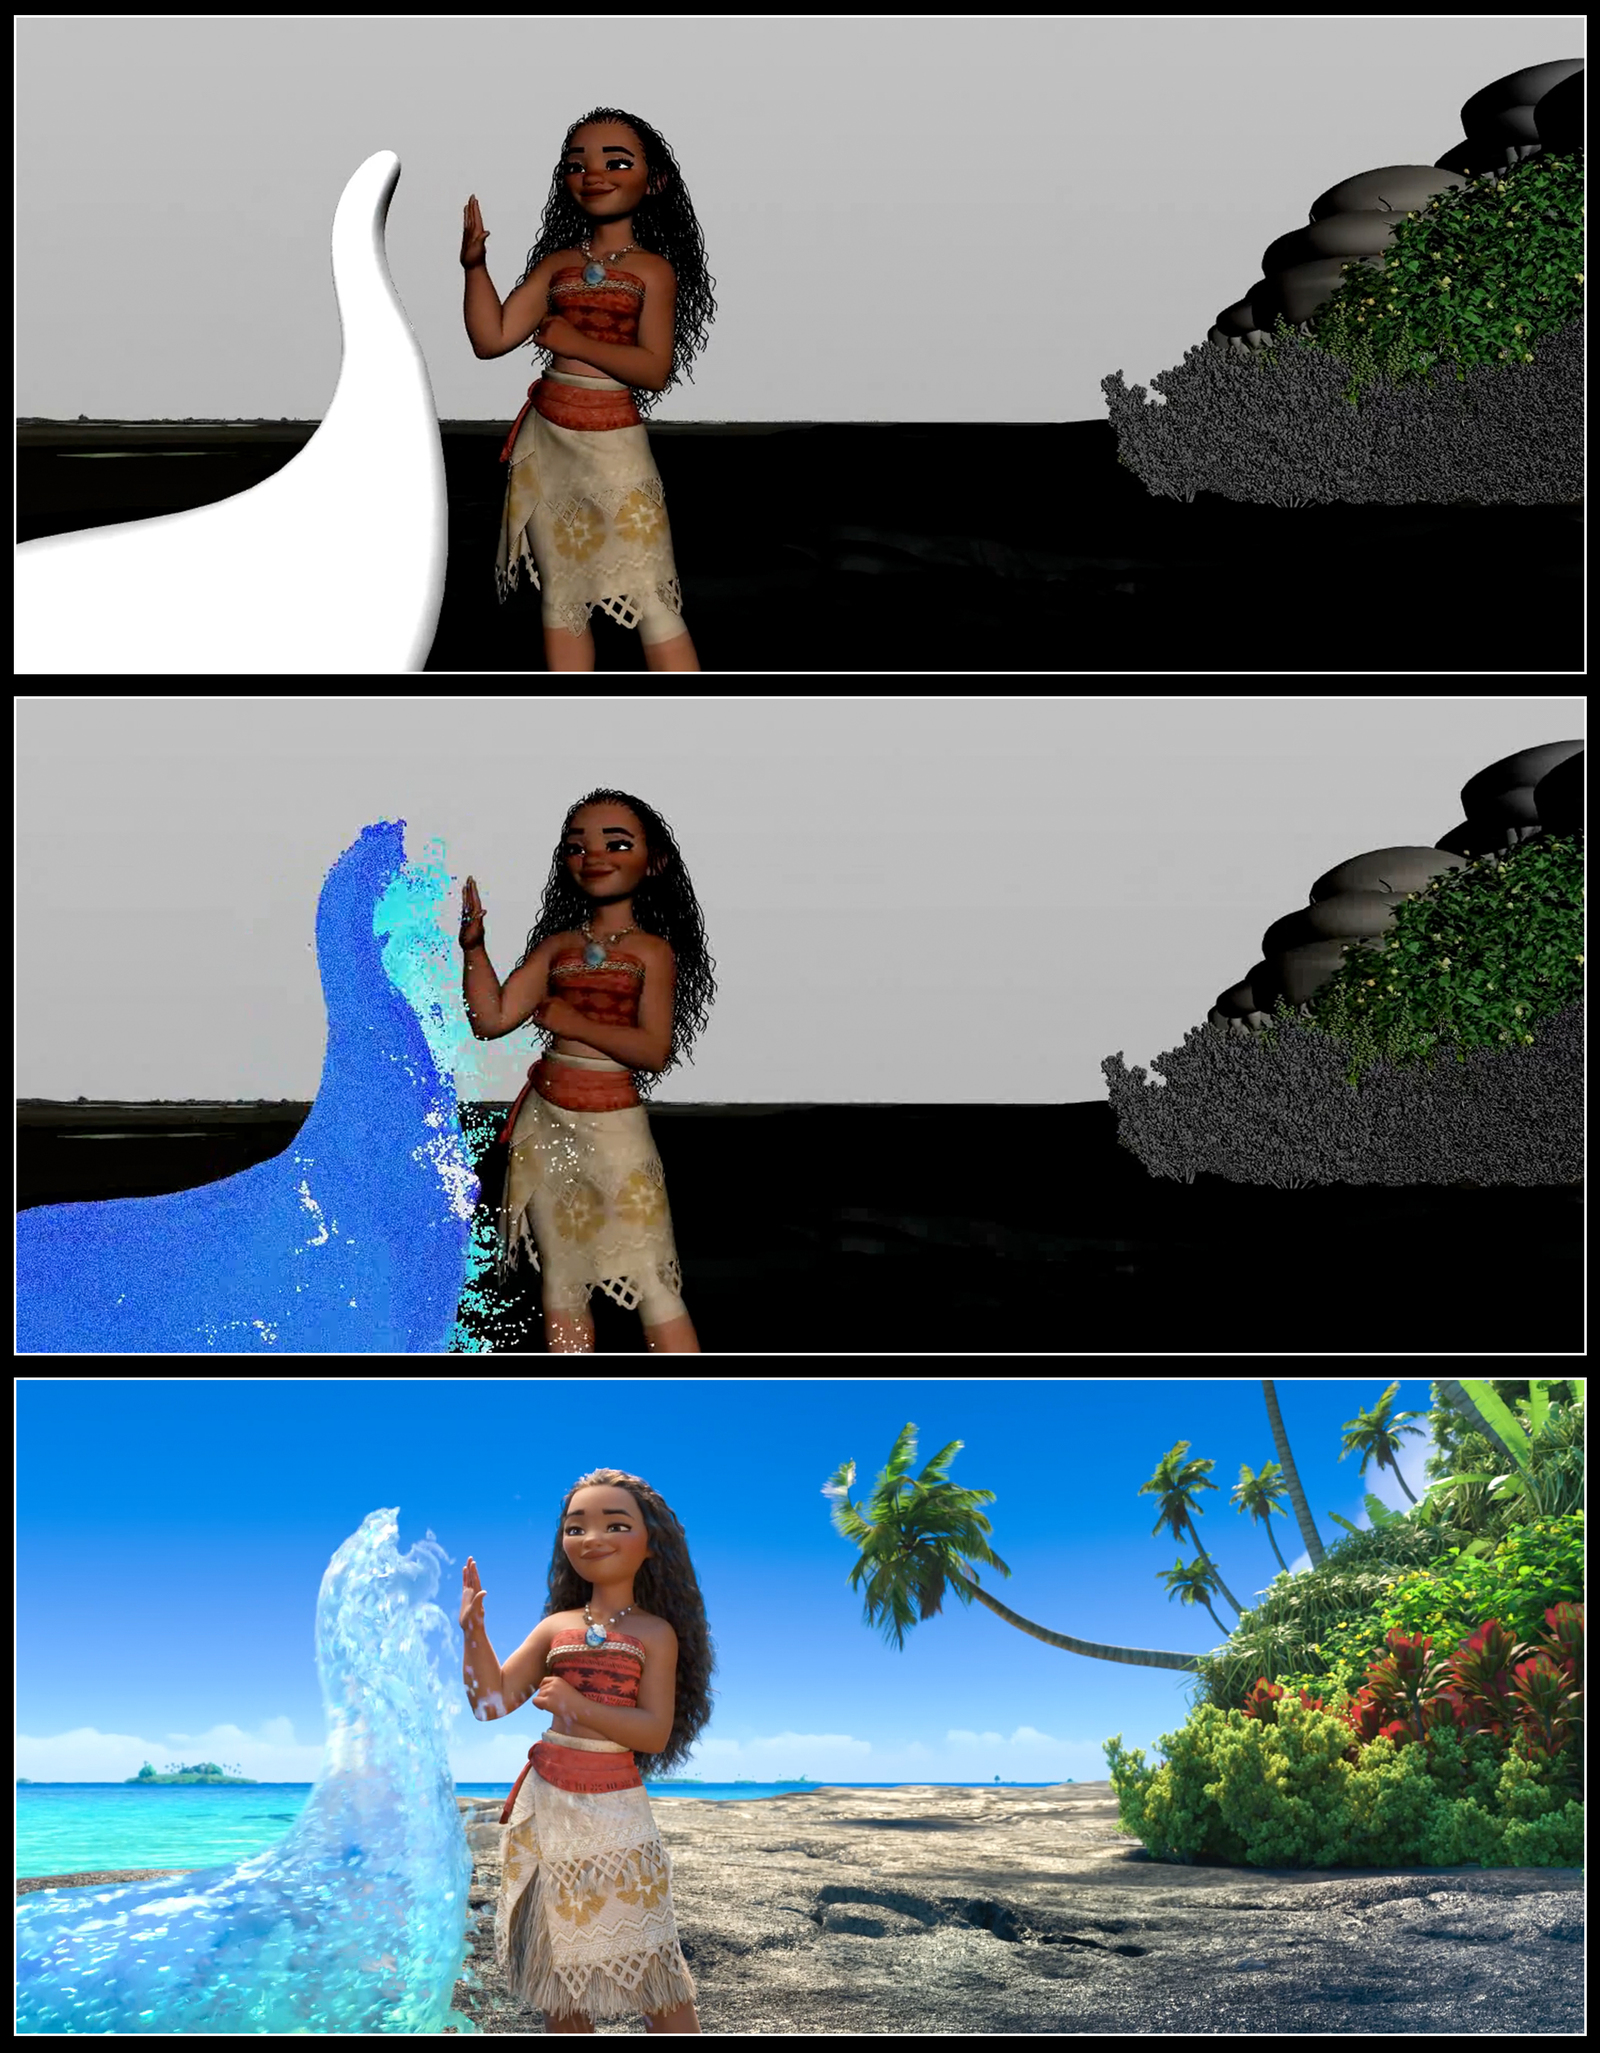 Sketches and concept art for the cartoon Moana - Cartoons, Moana, Sketch, Concept Art, Walt disney company, Longpost